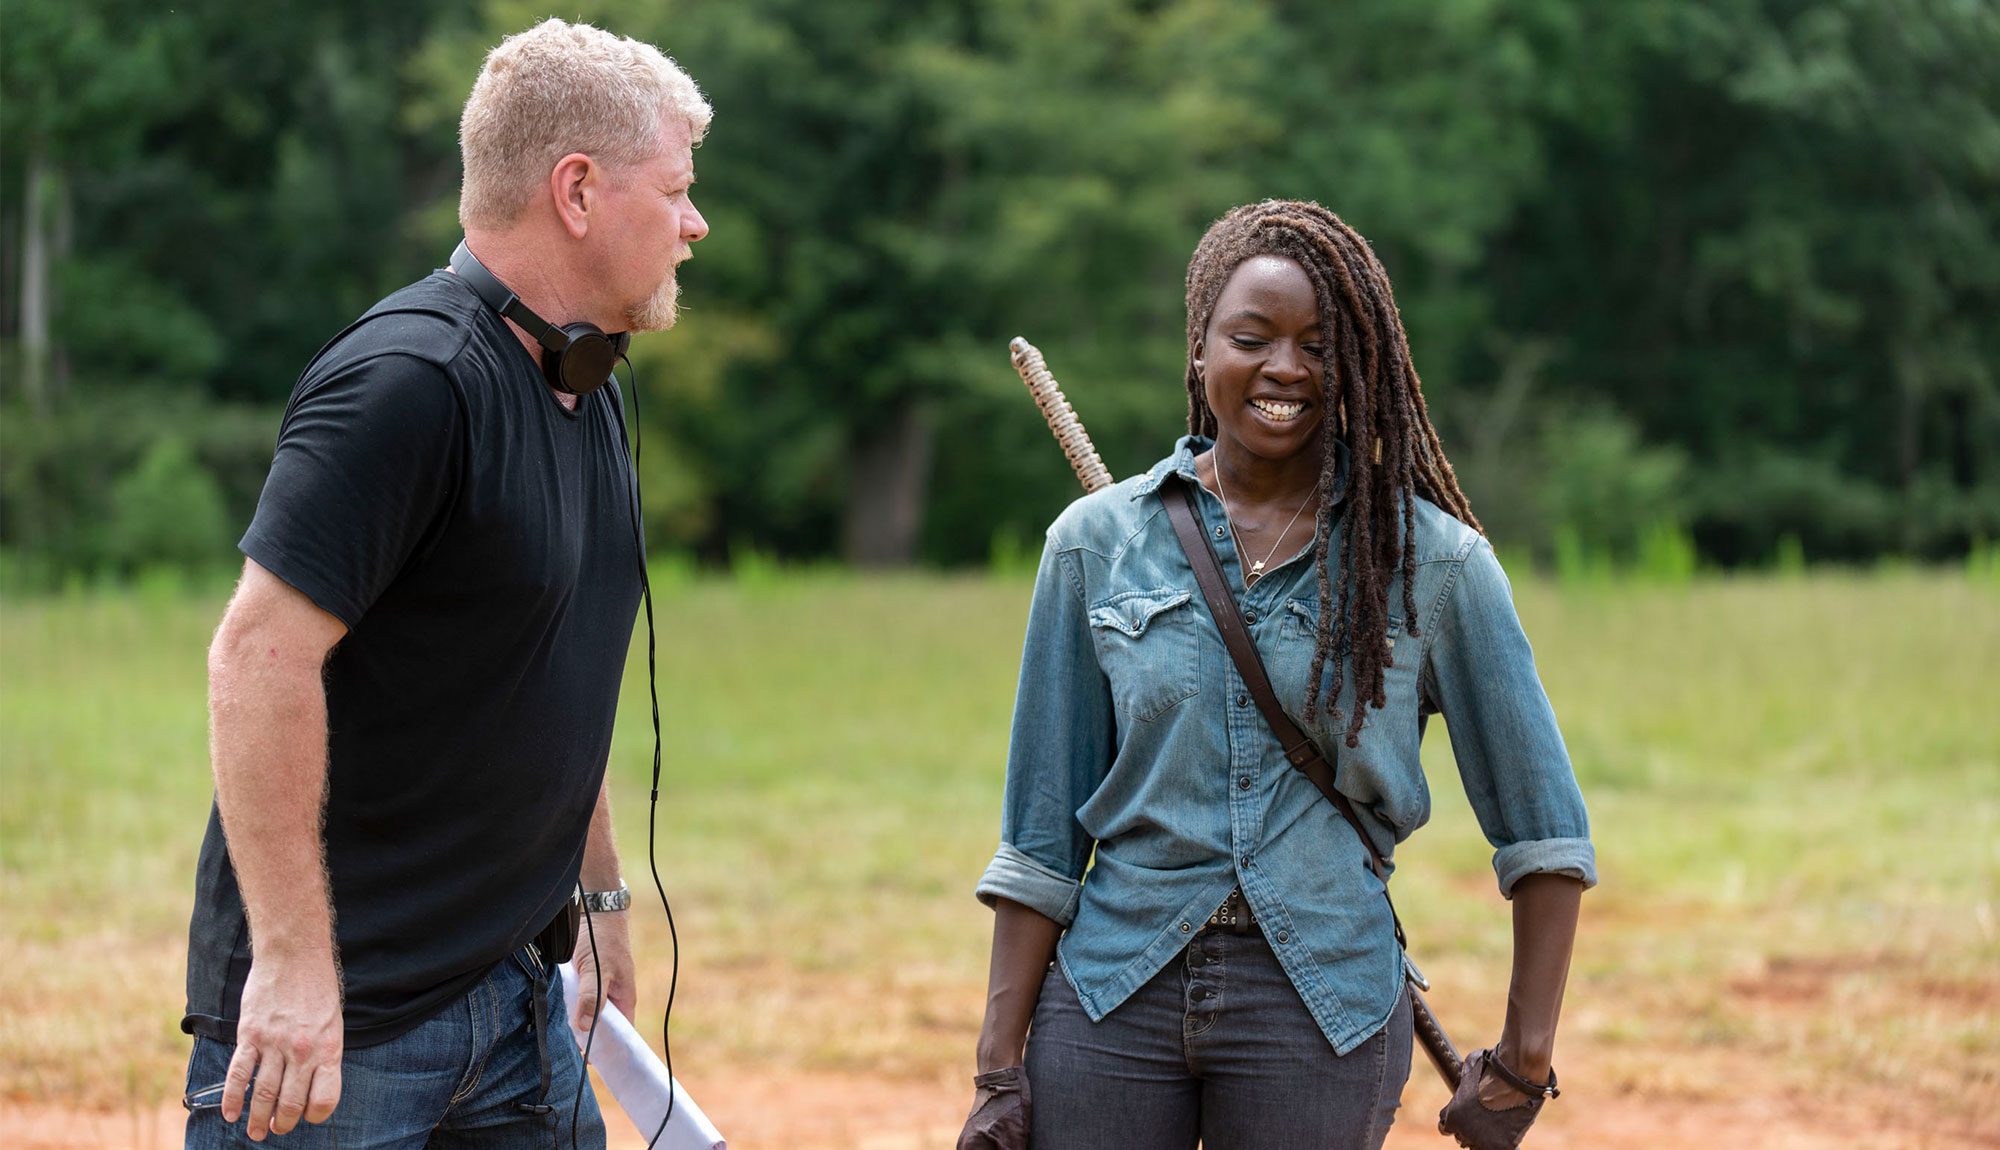 Michael Cudlitz Will Direct An Episode Of The Walking Dead In Season 10